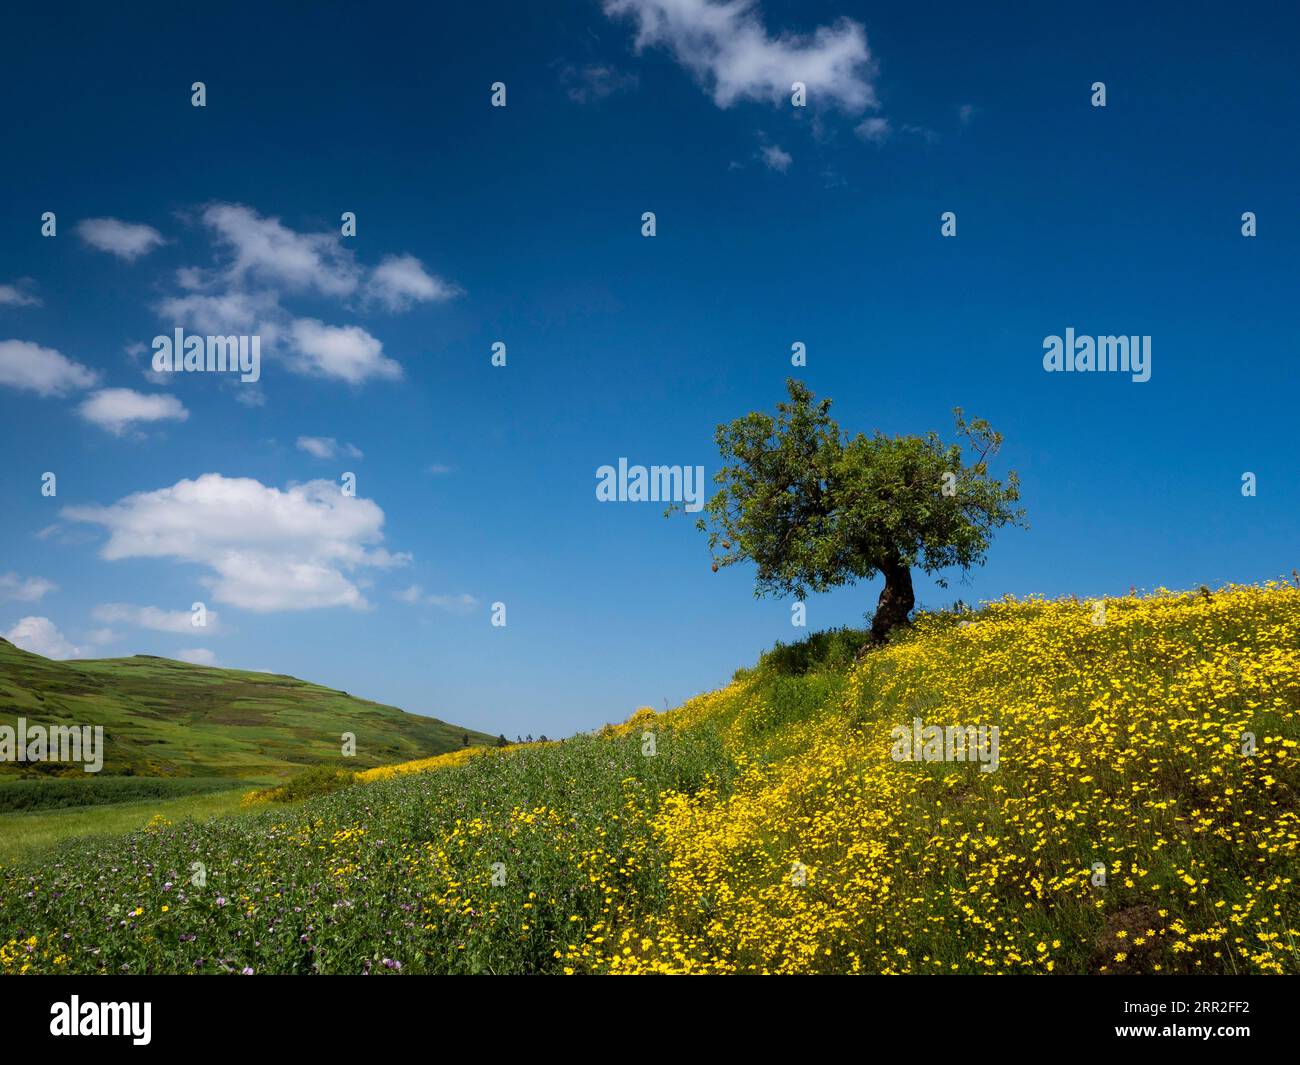 Yellow flower meadow, hilly landscape with tree, Ethiopia Stock Photo